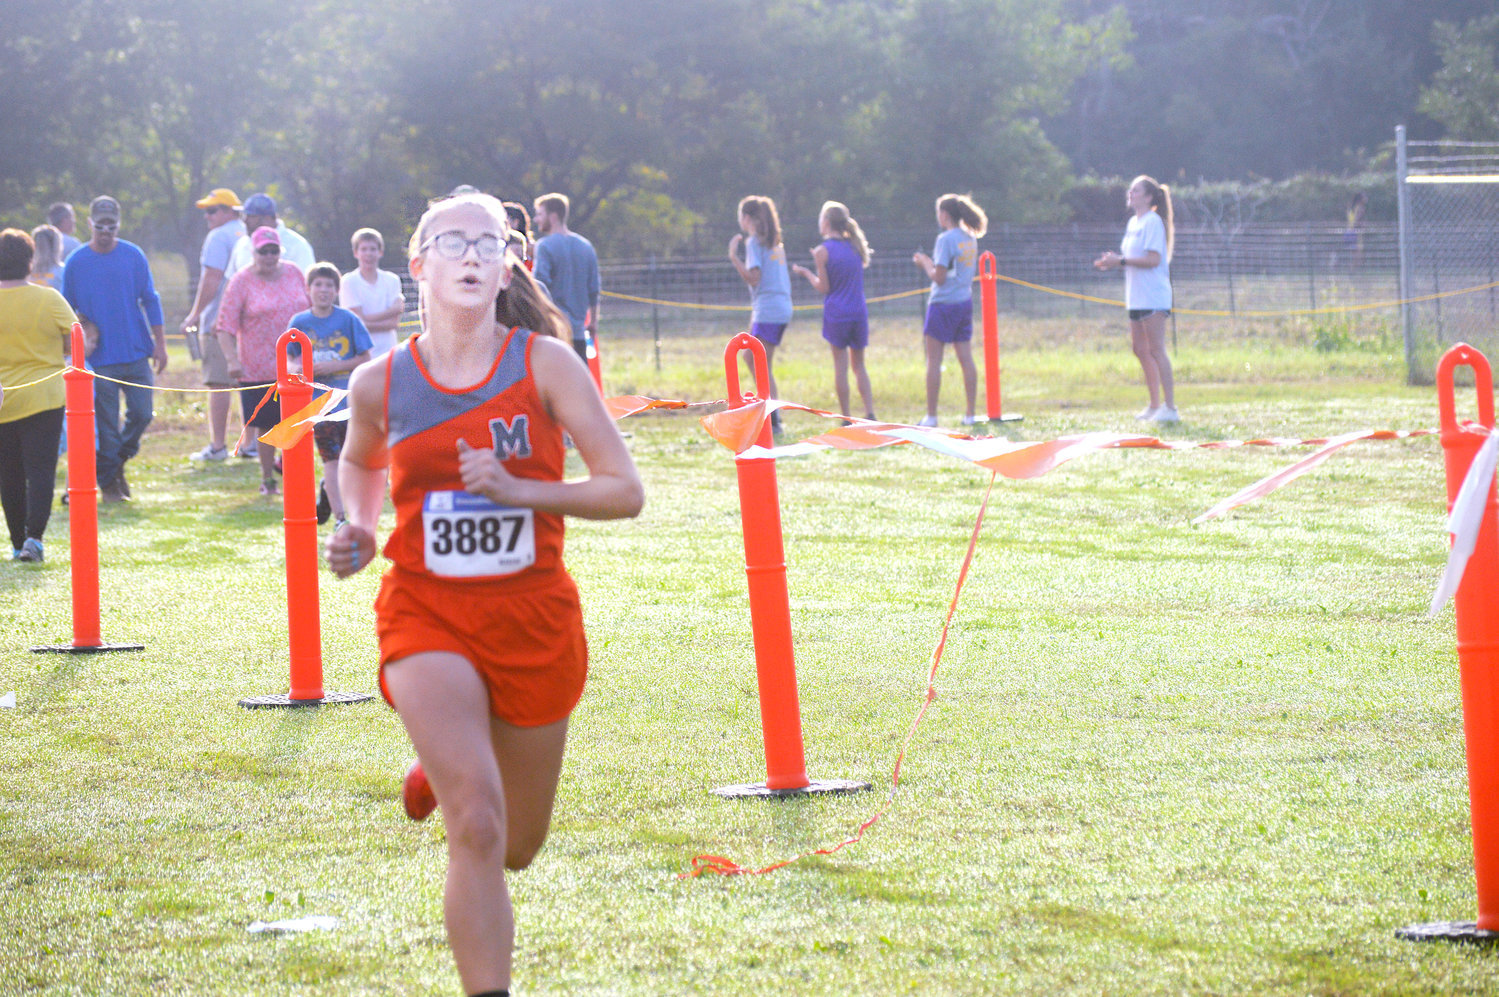 Mineola’s Hannah Zoch had a second place finish with a time of 13:33.33 at the district cross country meet held in Mineola Saturday.